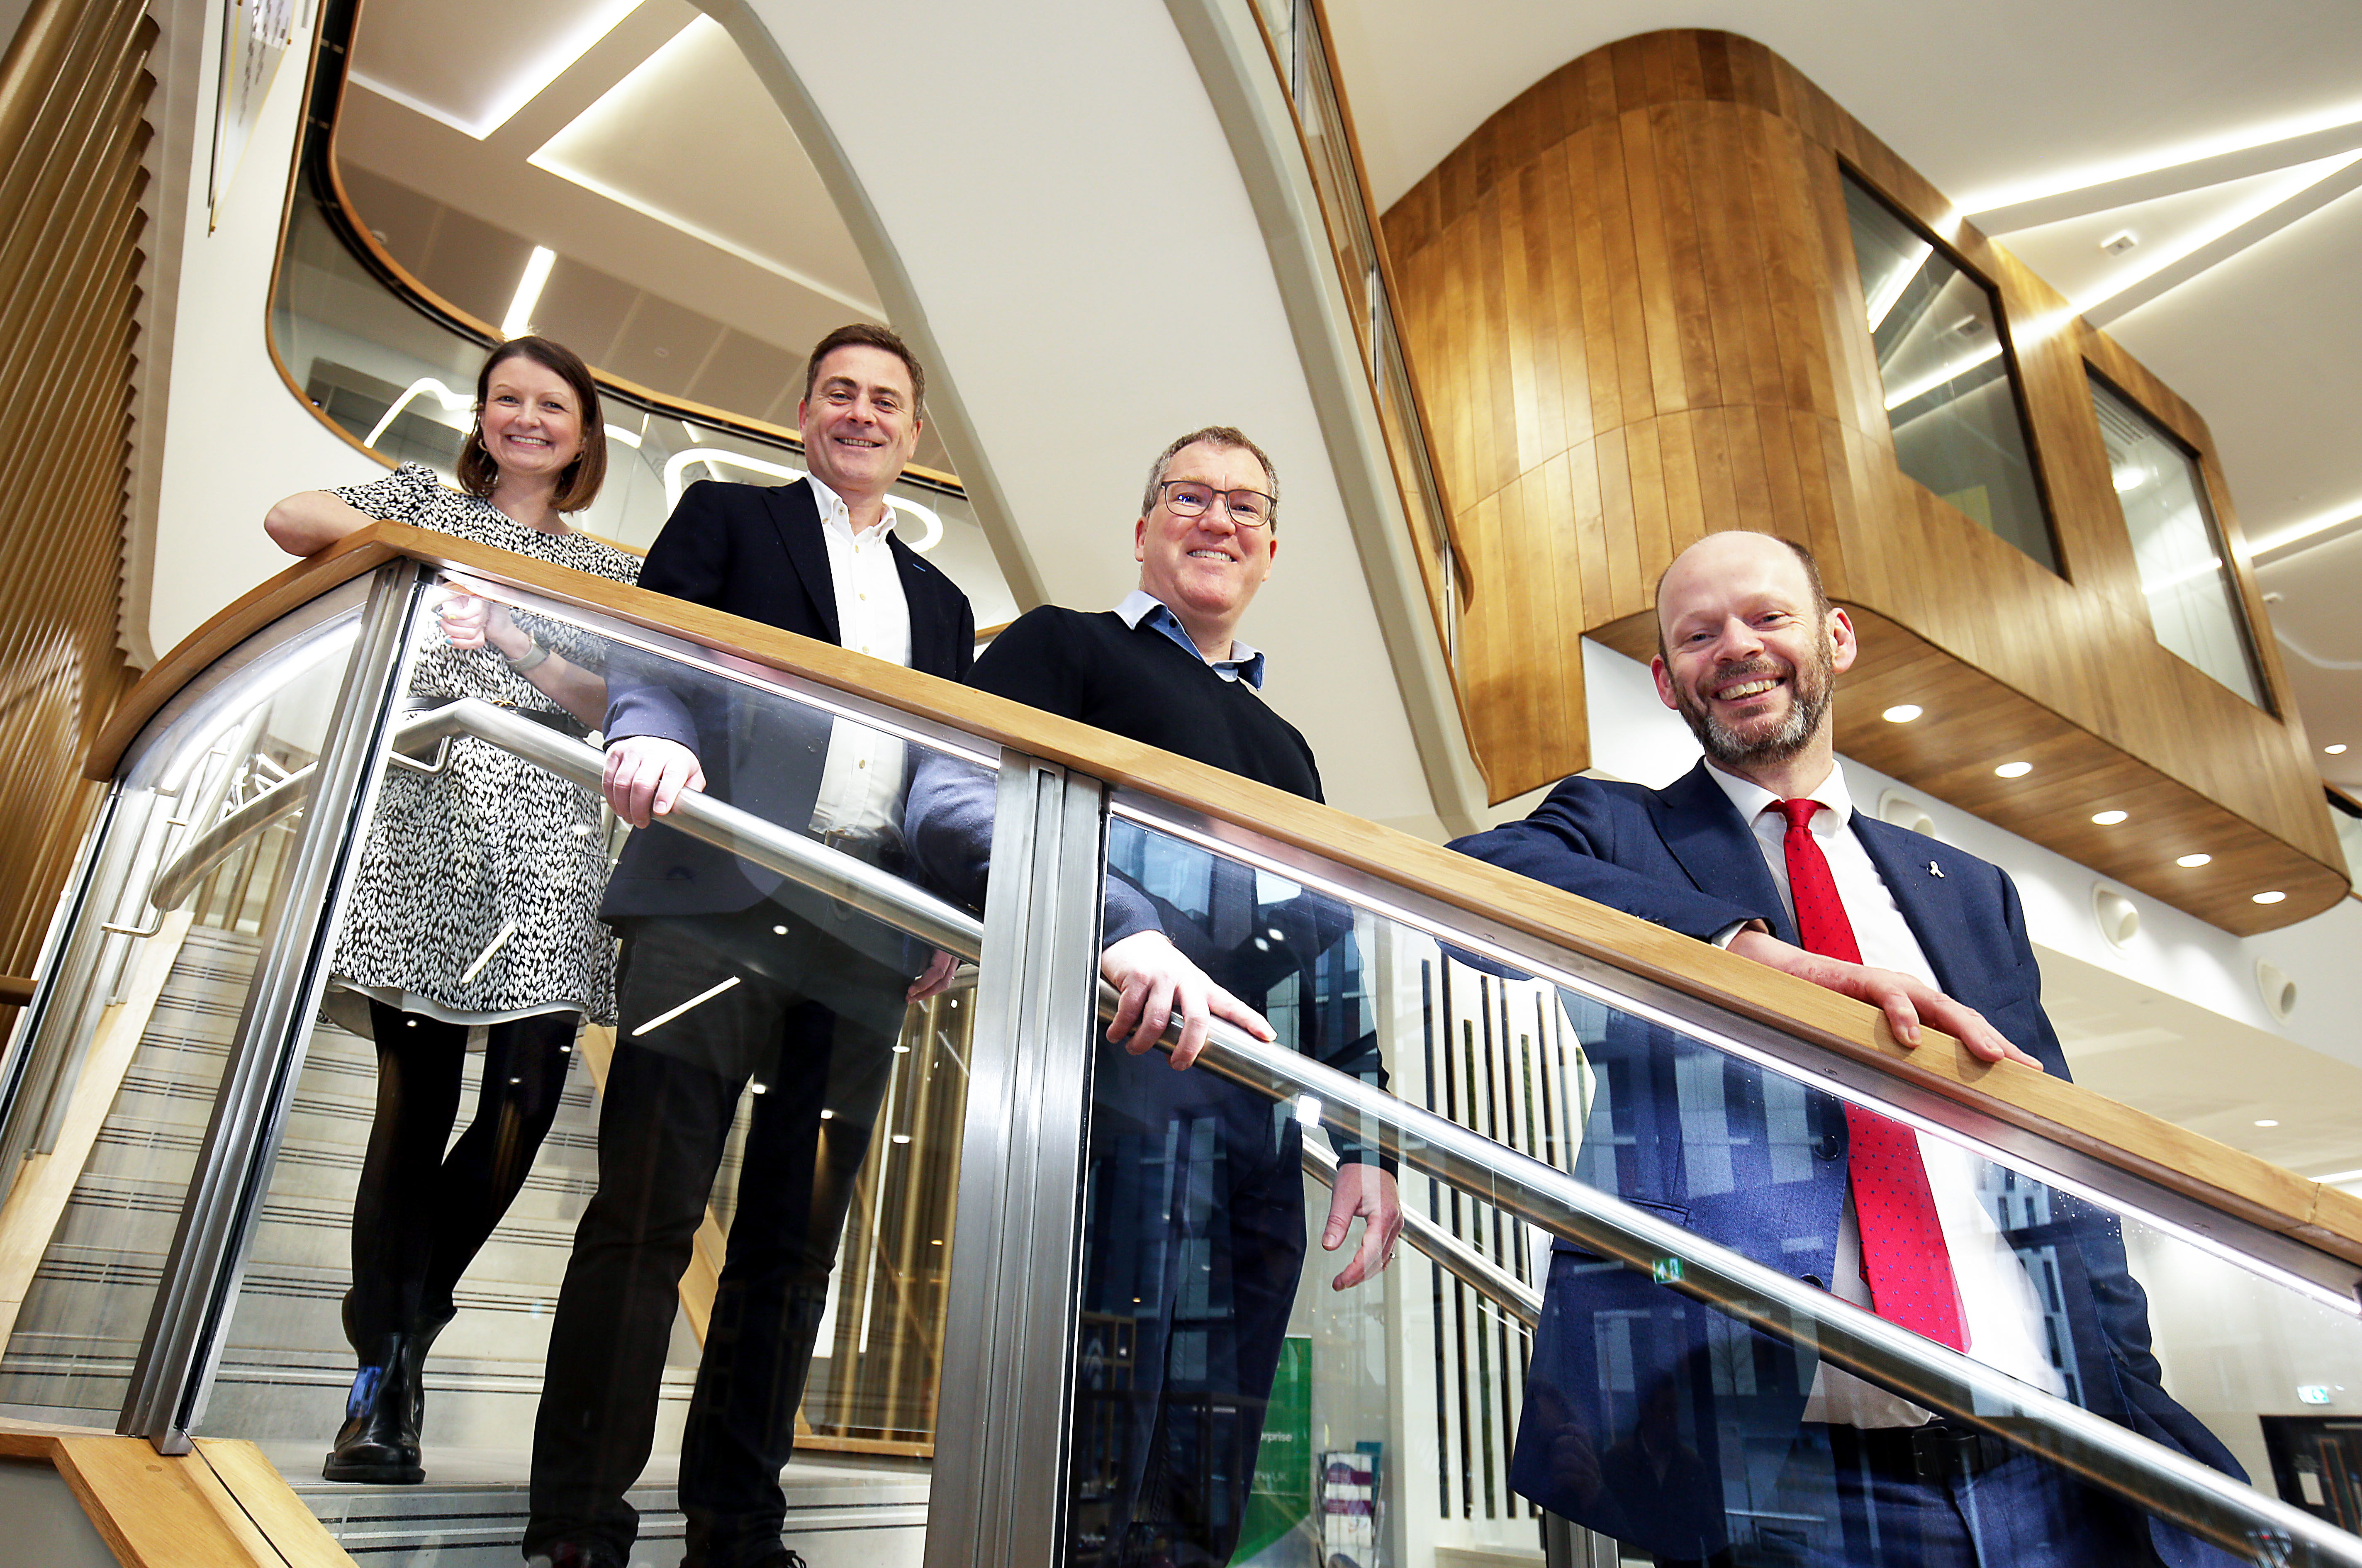  (L to R) Jen Hartley, Director, Invest Newcastle; Graham Hall, Managing Director, Credera; Ewan Miller, Managing Director, Credera; Jamie Driscoll, North of Tyne Combined Authority Mayor.